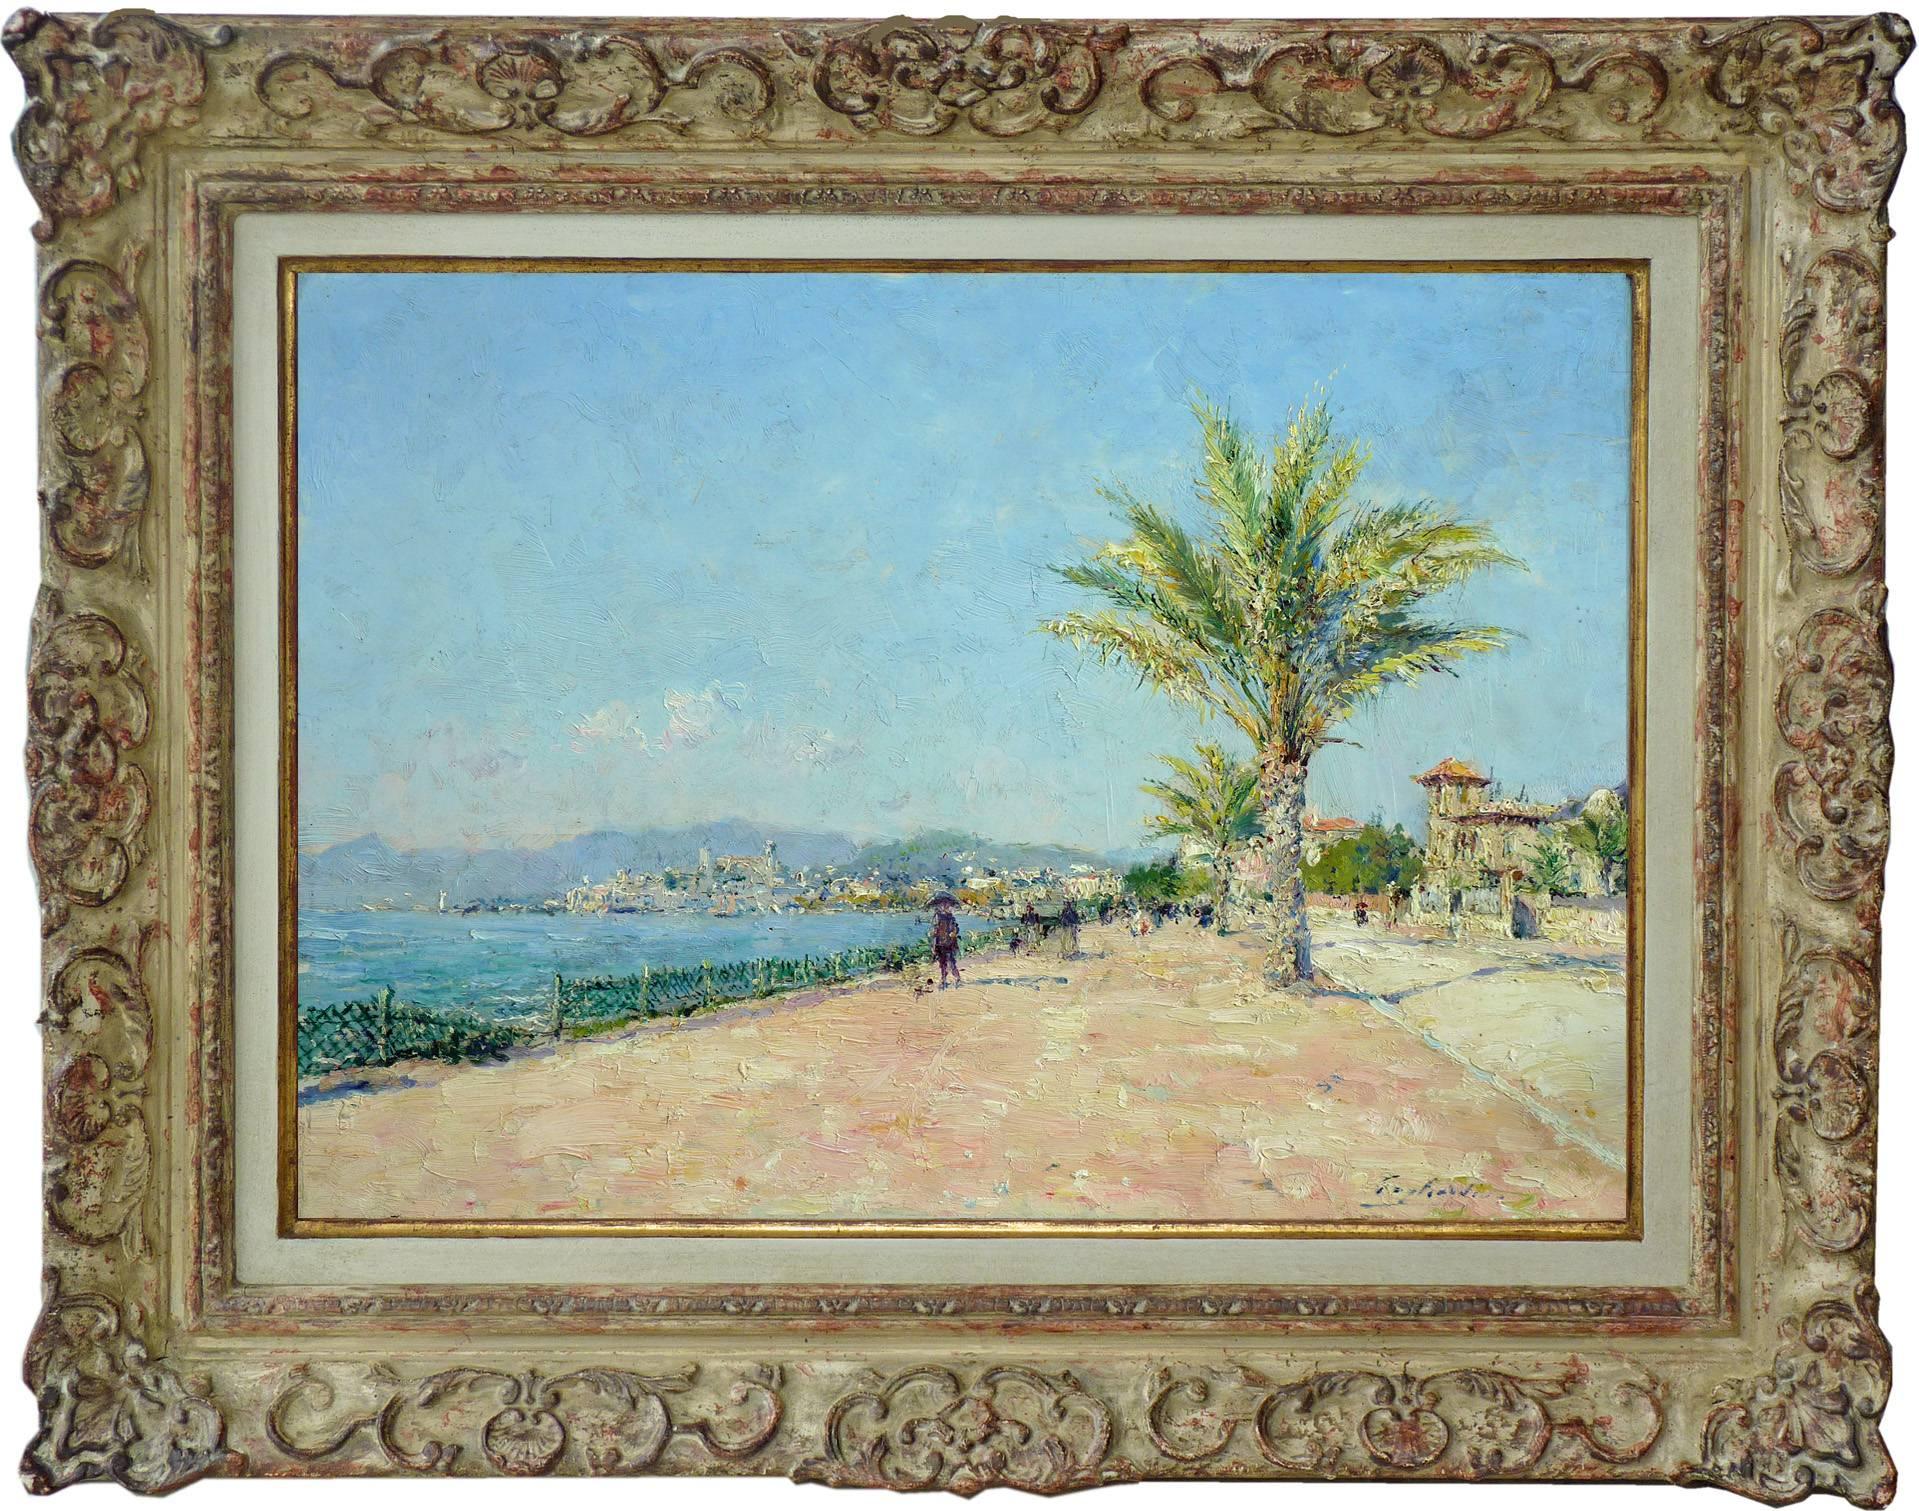 Julien Gustave Gagliardini Landscape Painting - The , Croisette' promenade in Cannes, France, oil painting by Gagliardini